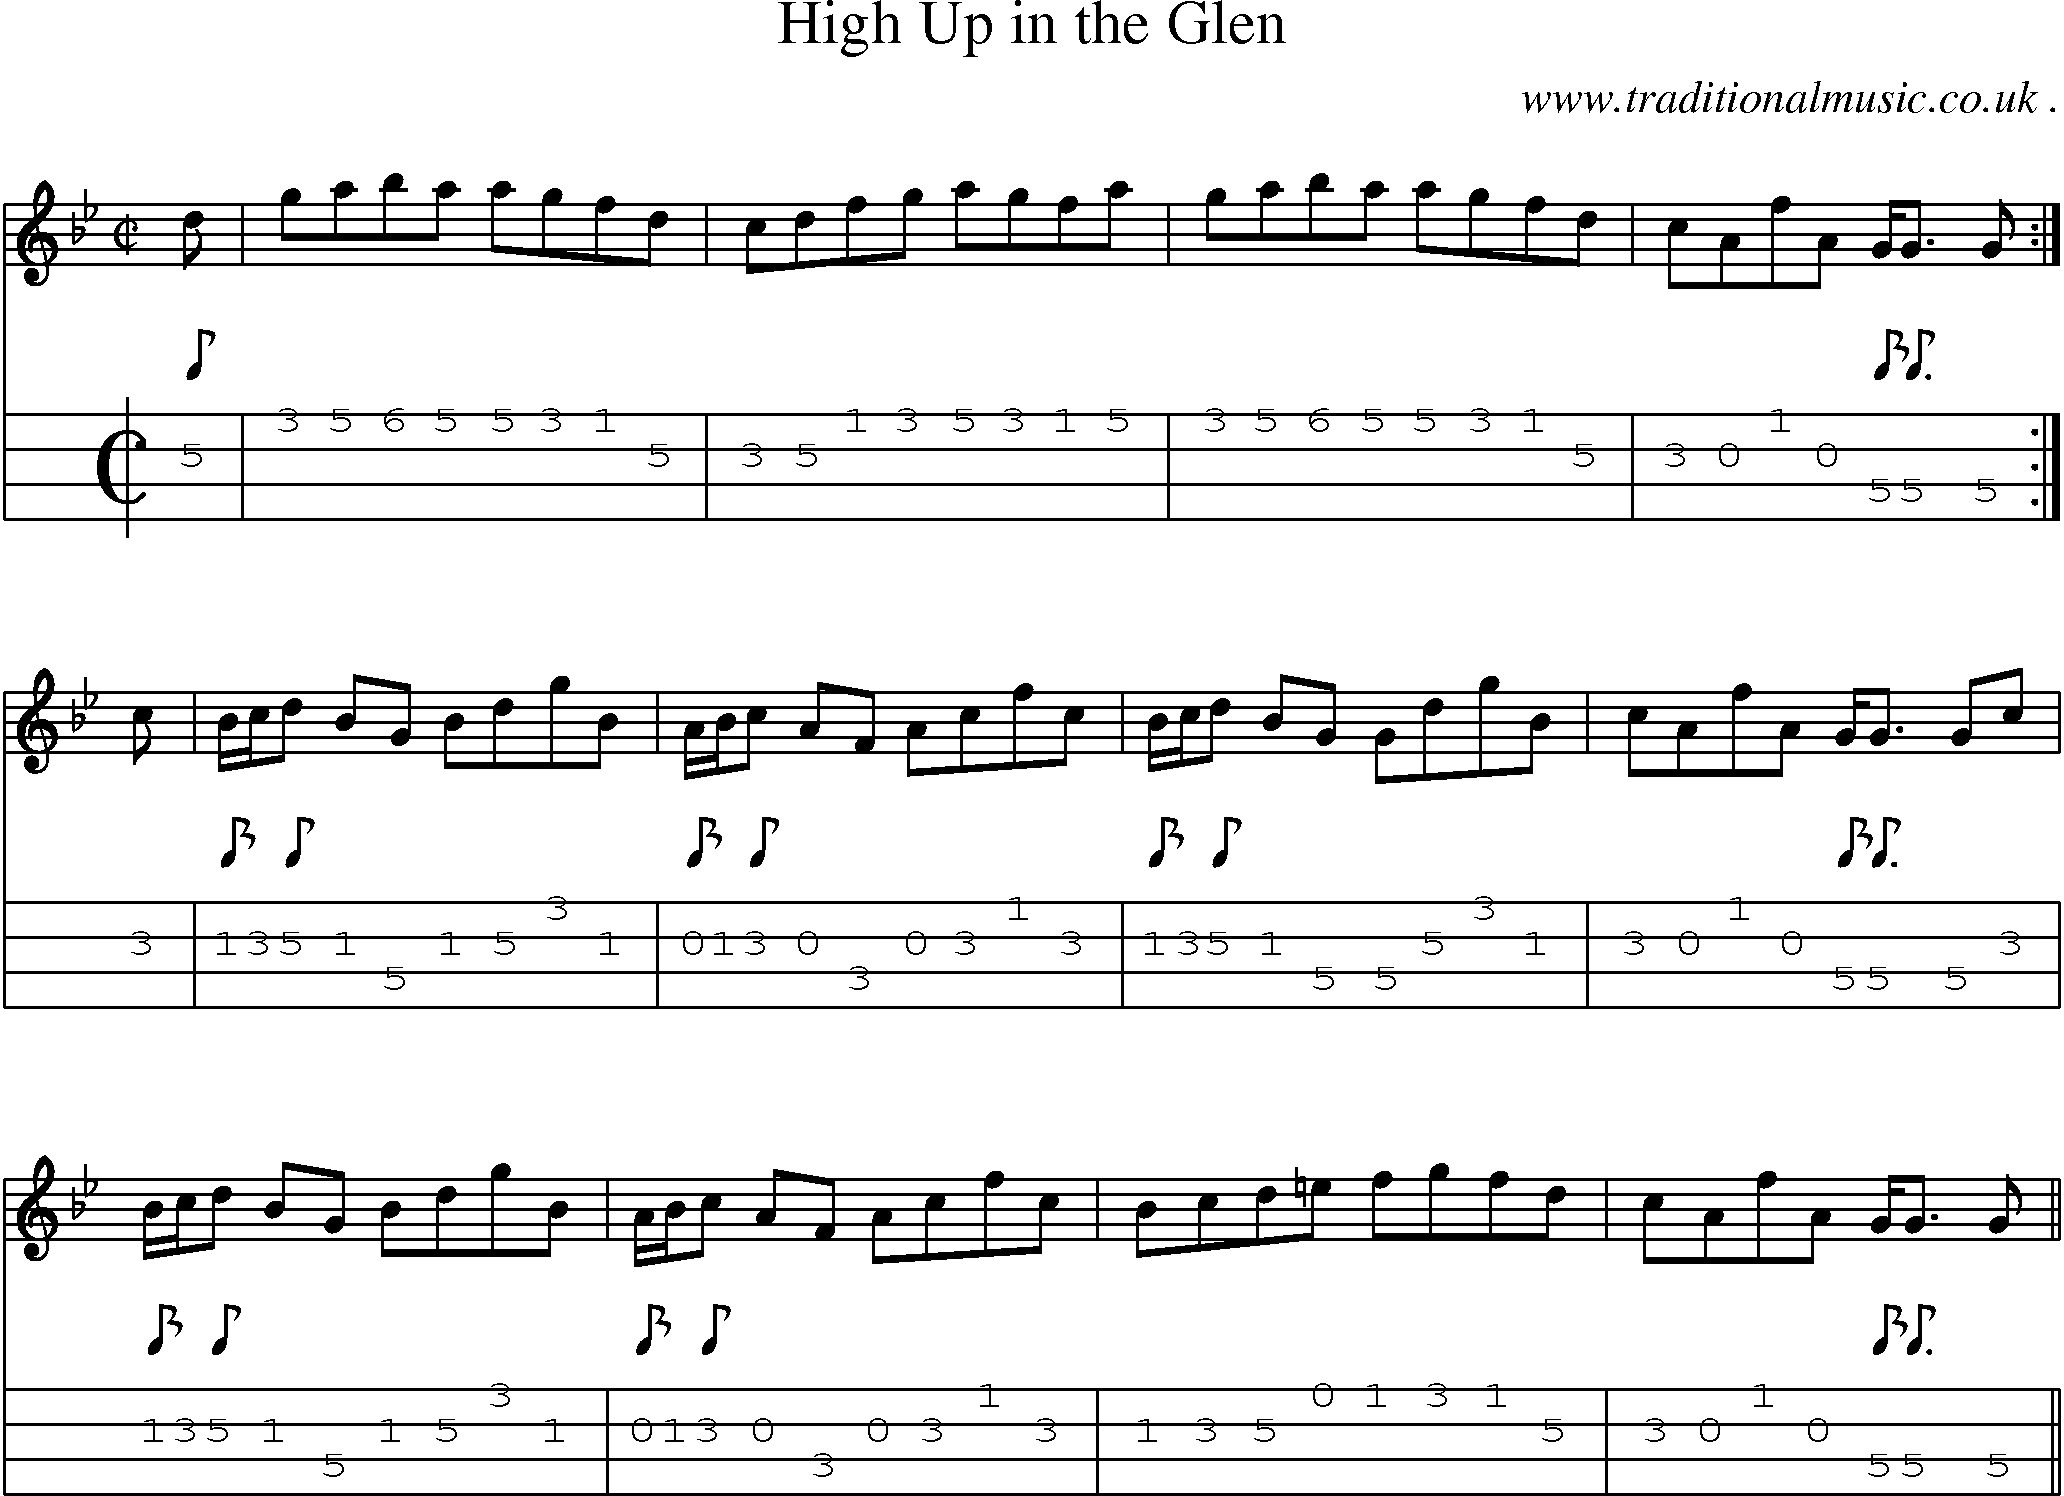 Sheet-music  score, Chords and Mandolin Tabs for High Up In The Glen